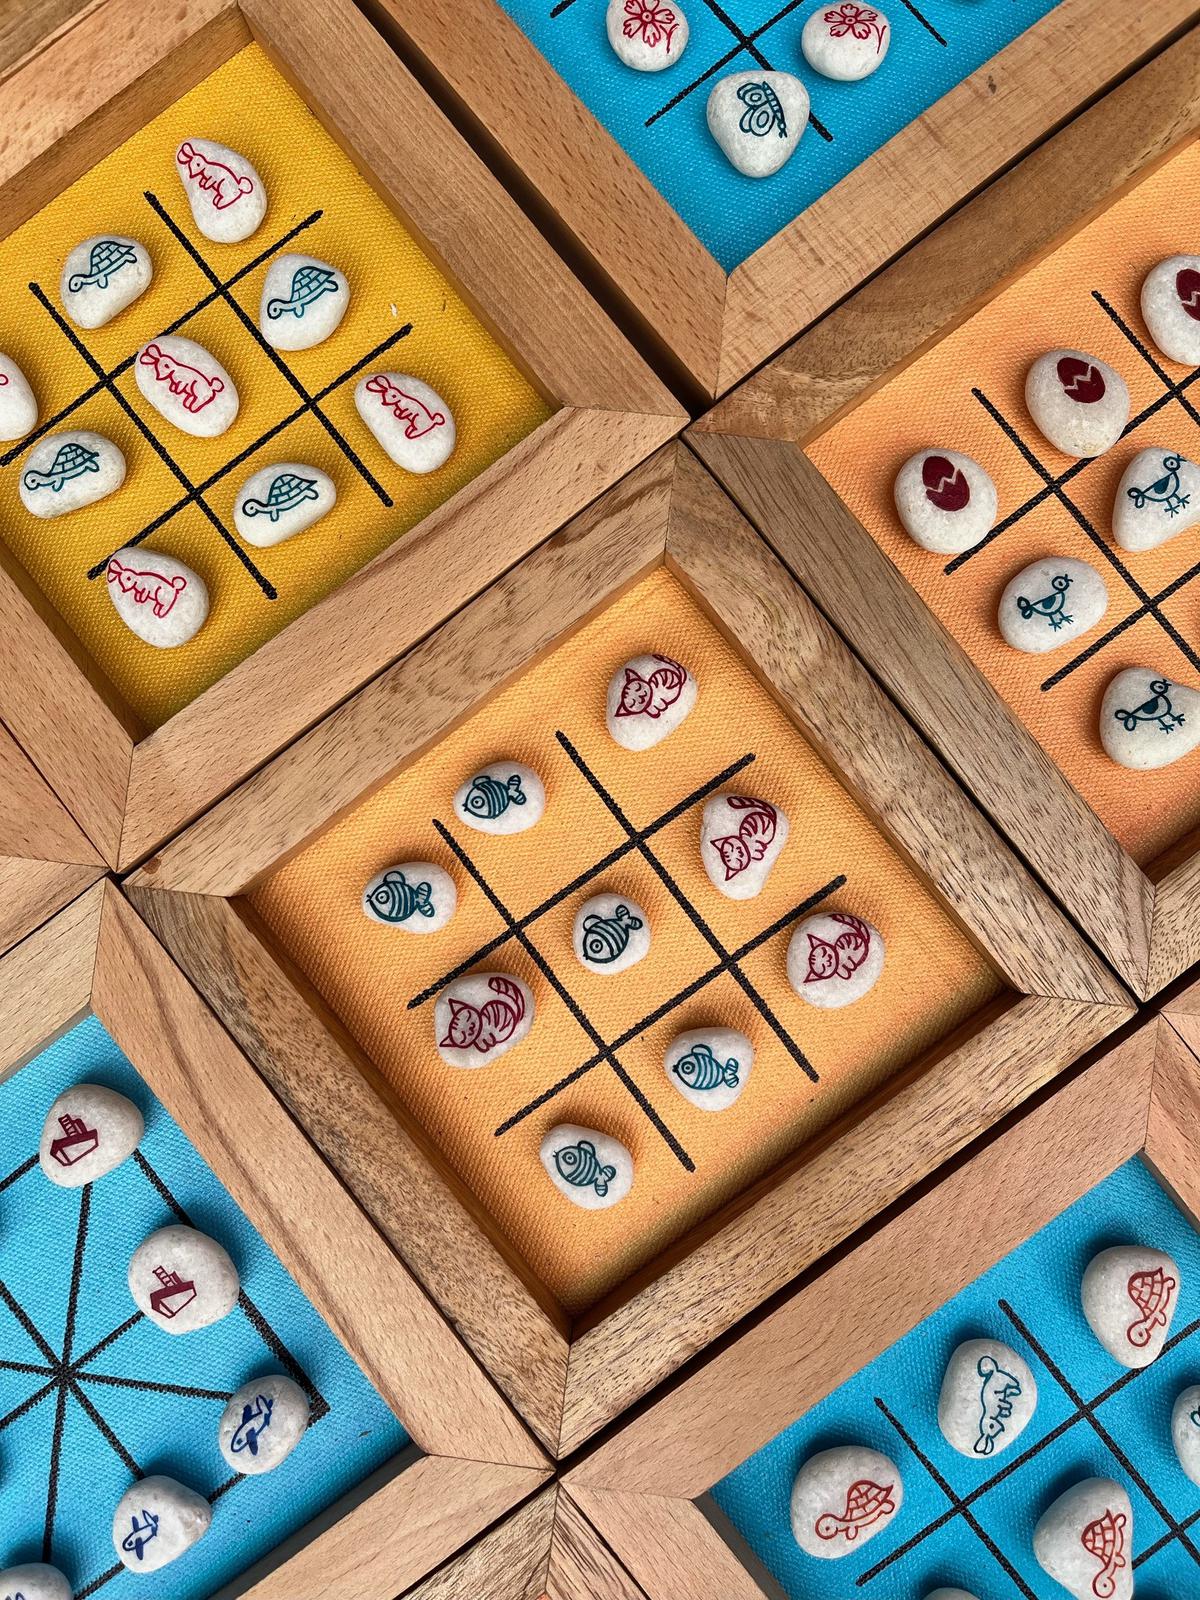 board games with hand painted stone coins